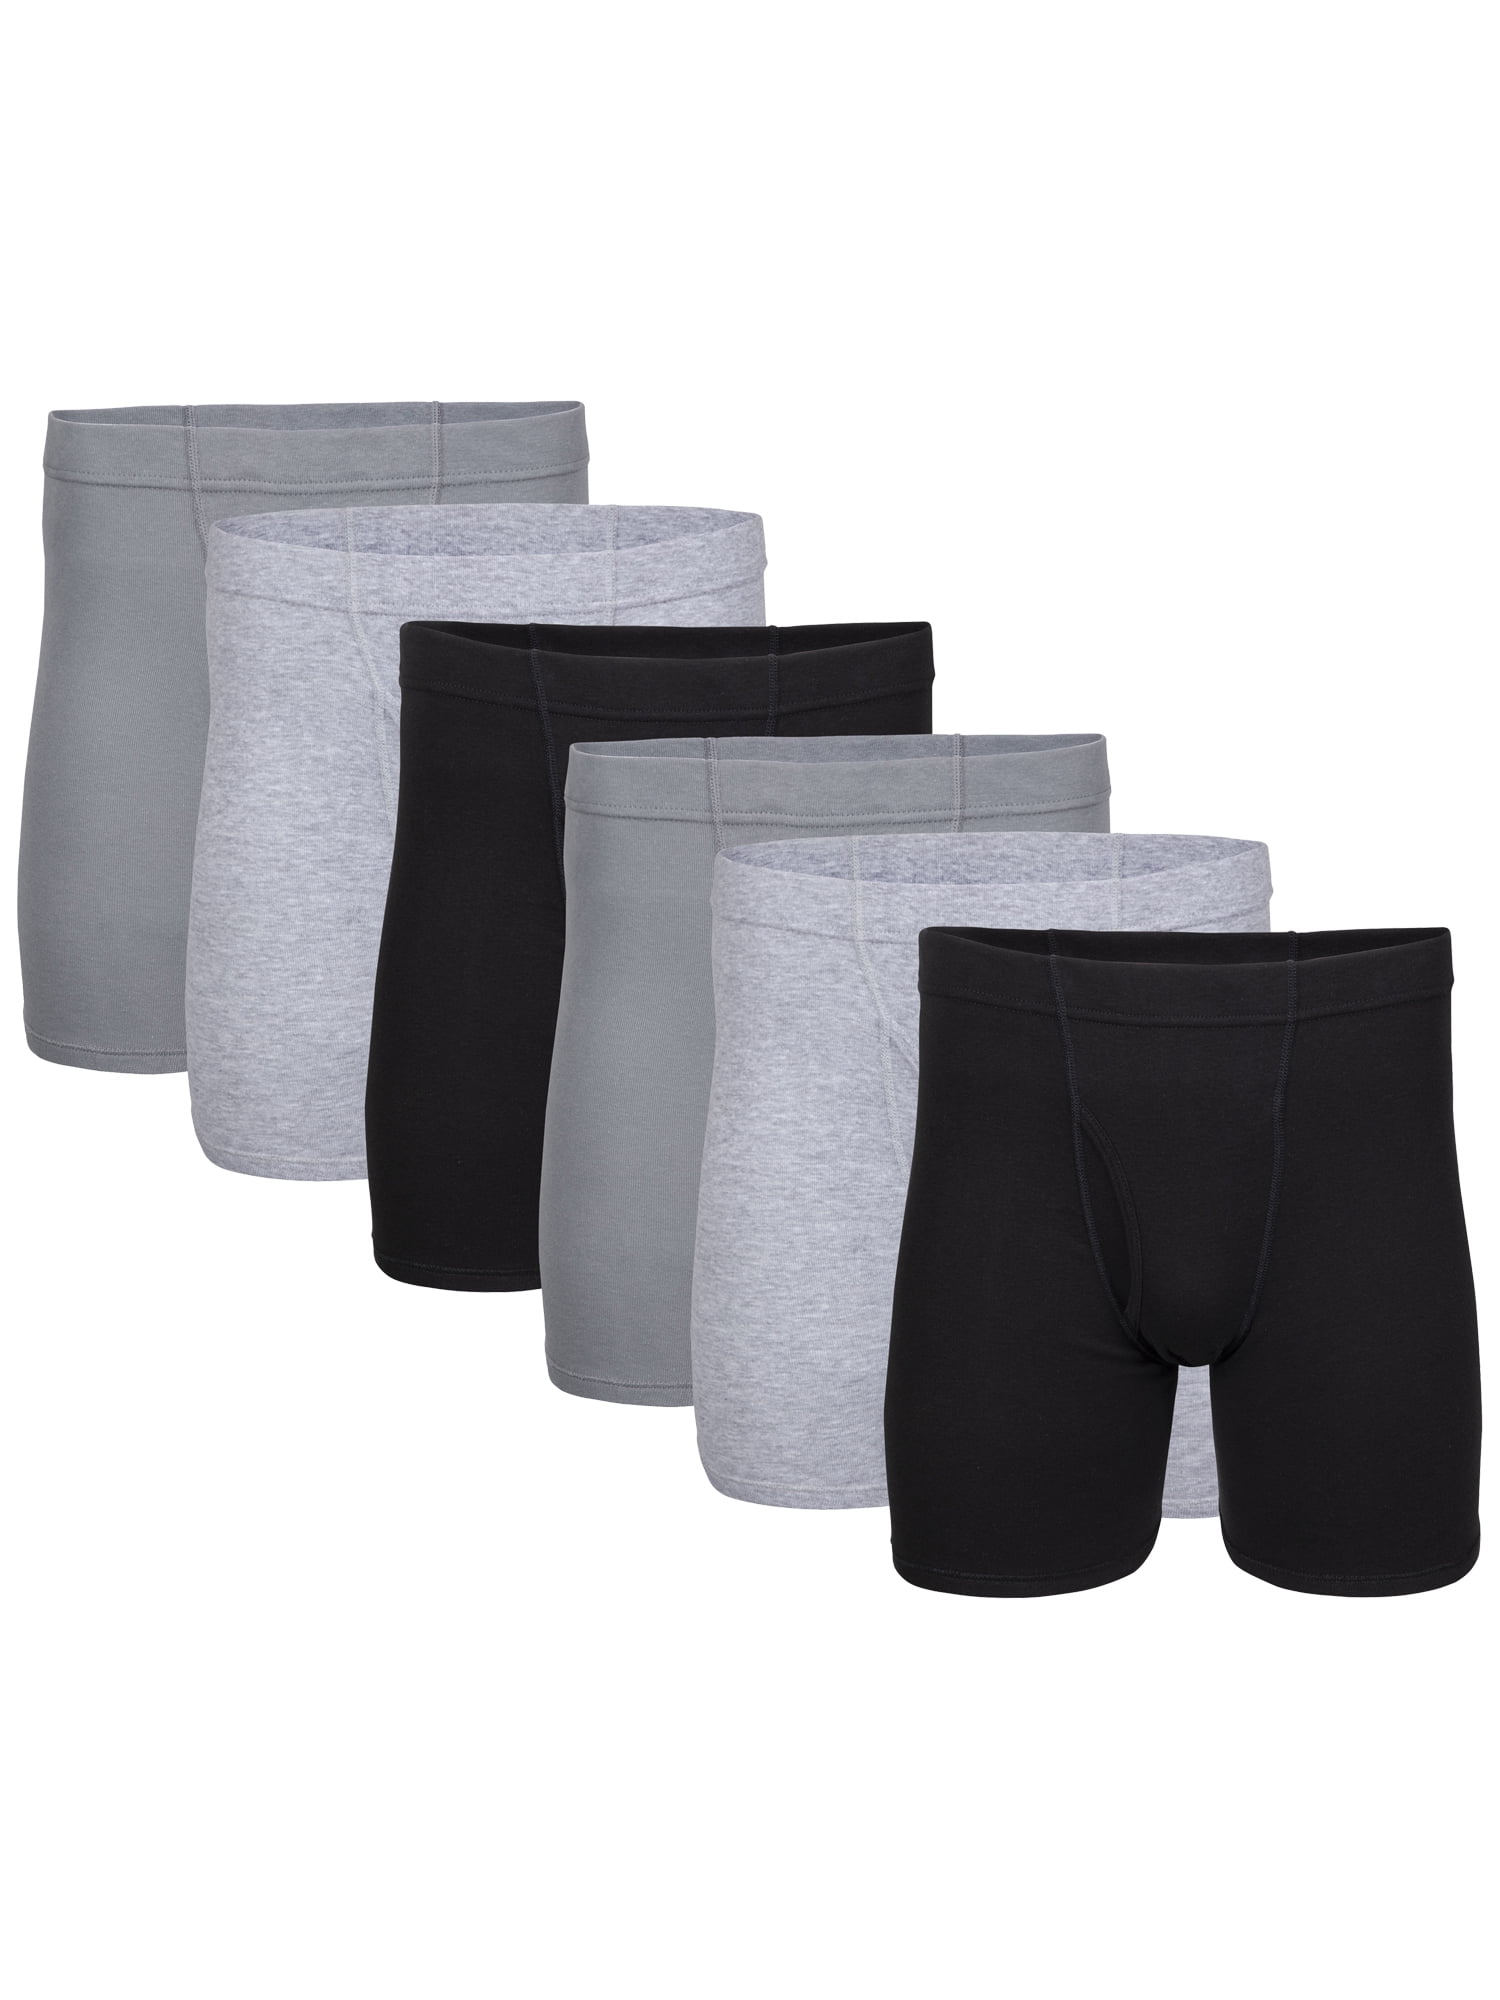 Gildan Adult Men's Boxer Briefs With Covered Waistband, 10-Pack, Sizes  S-2XL, 6 Inseam 